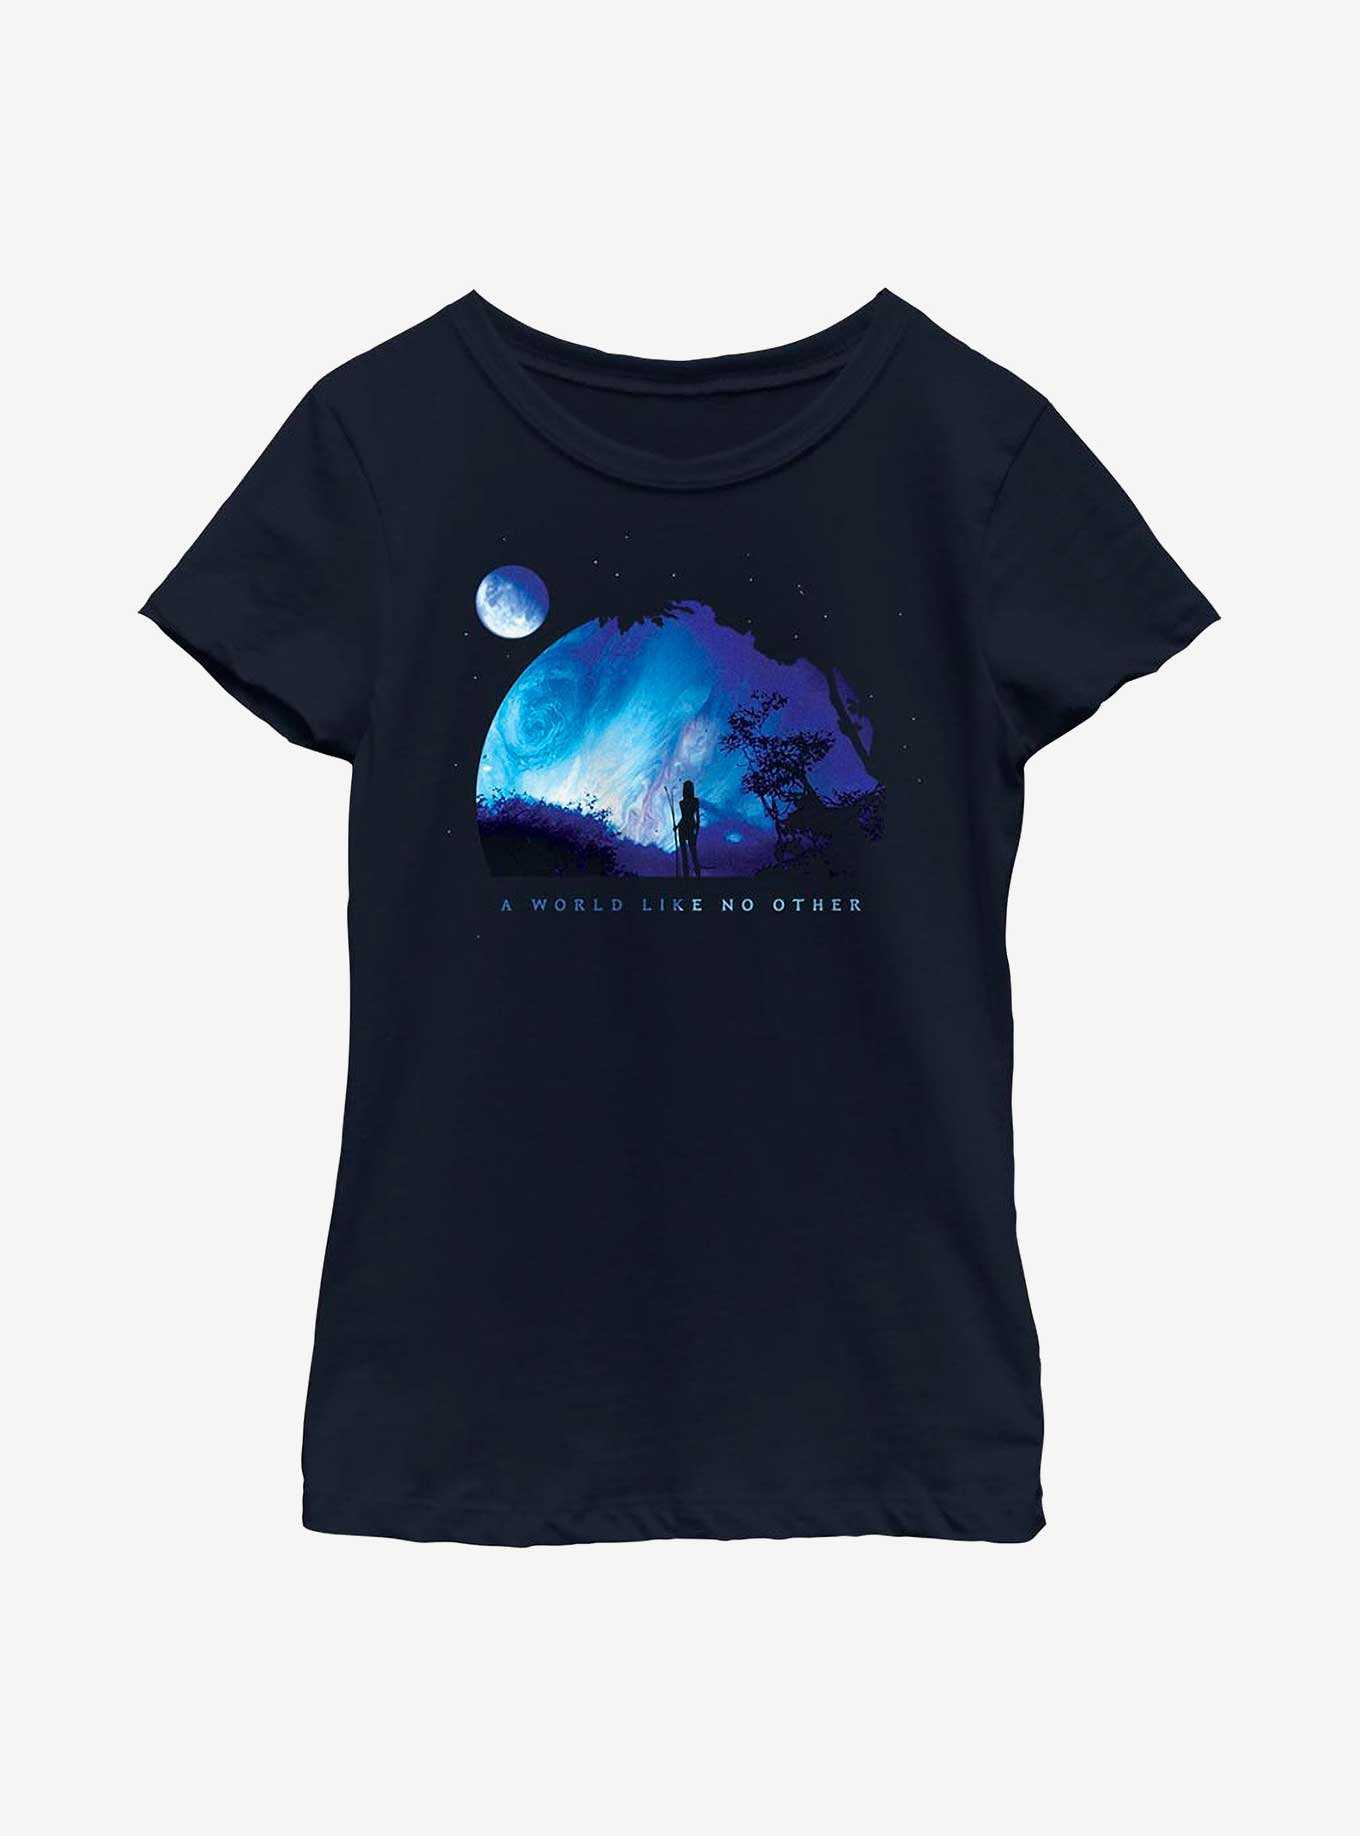 Avatar A World Like No Other Youth Girls T-Shirt, , hi-res